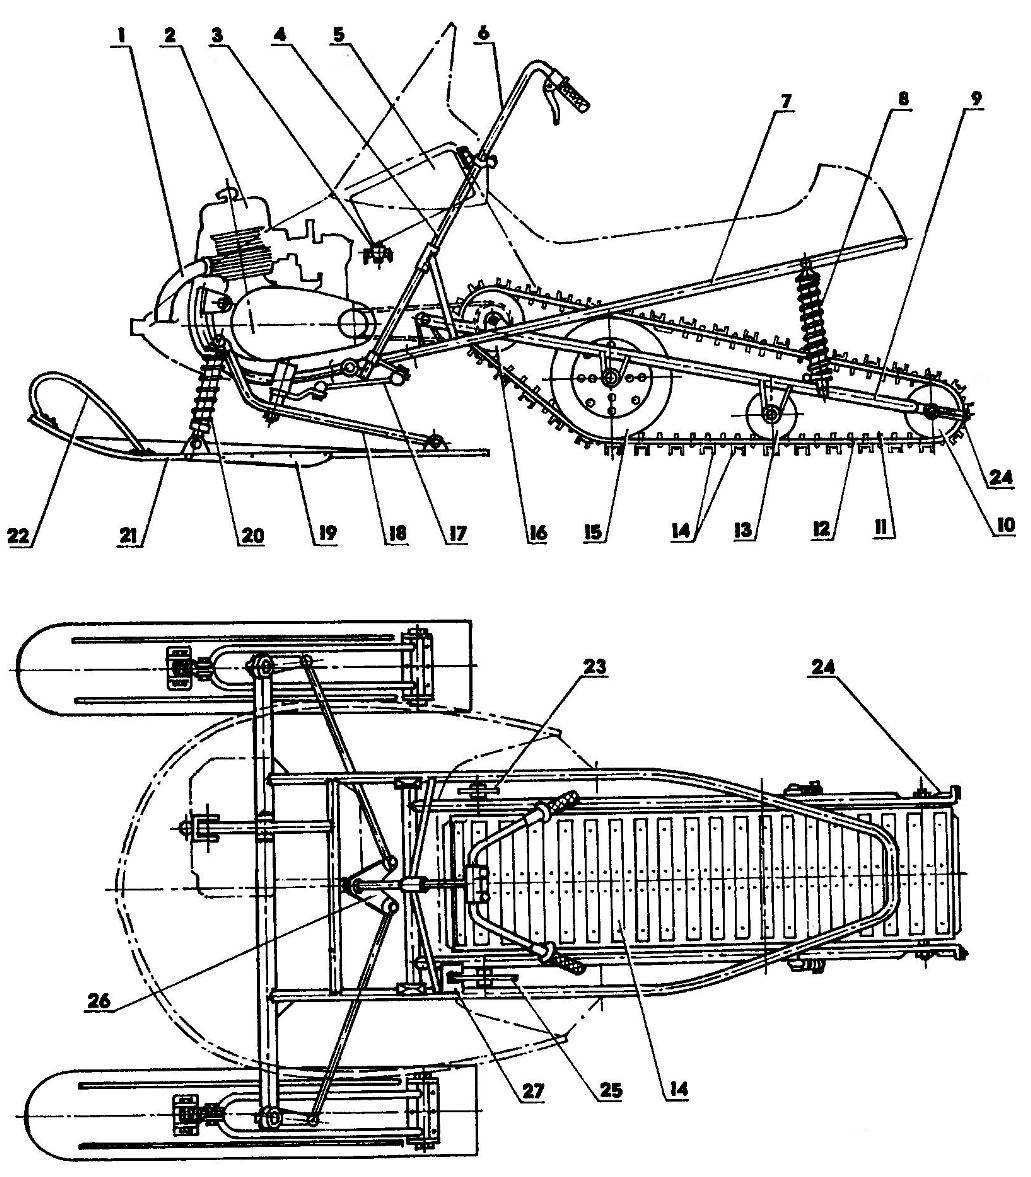 The layout of a snowmobile